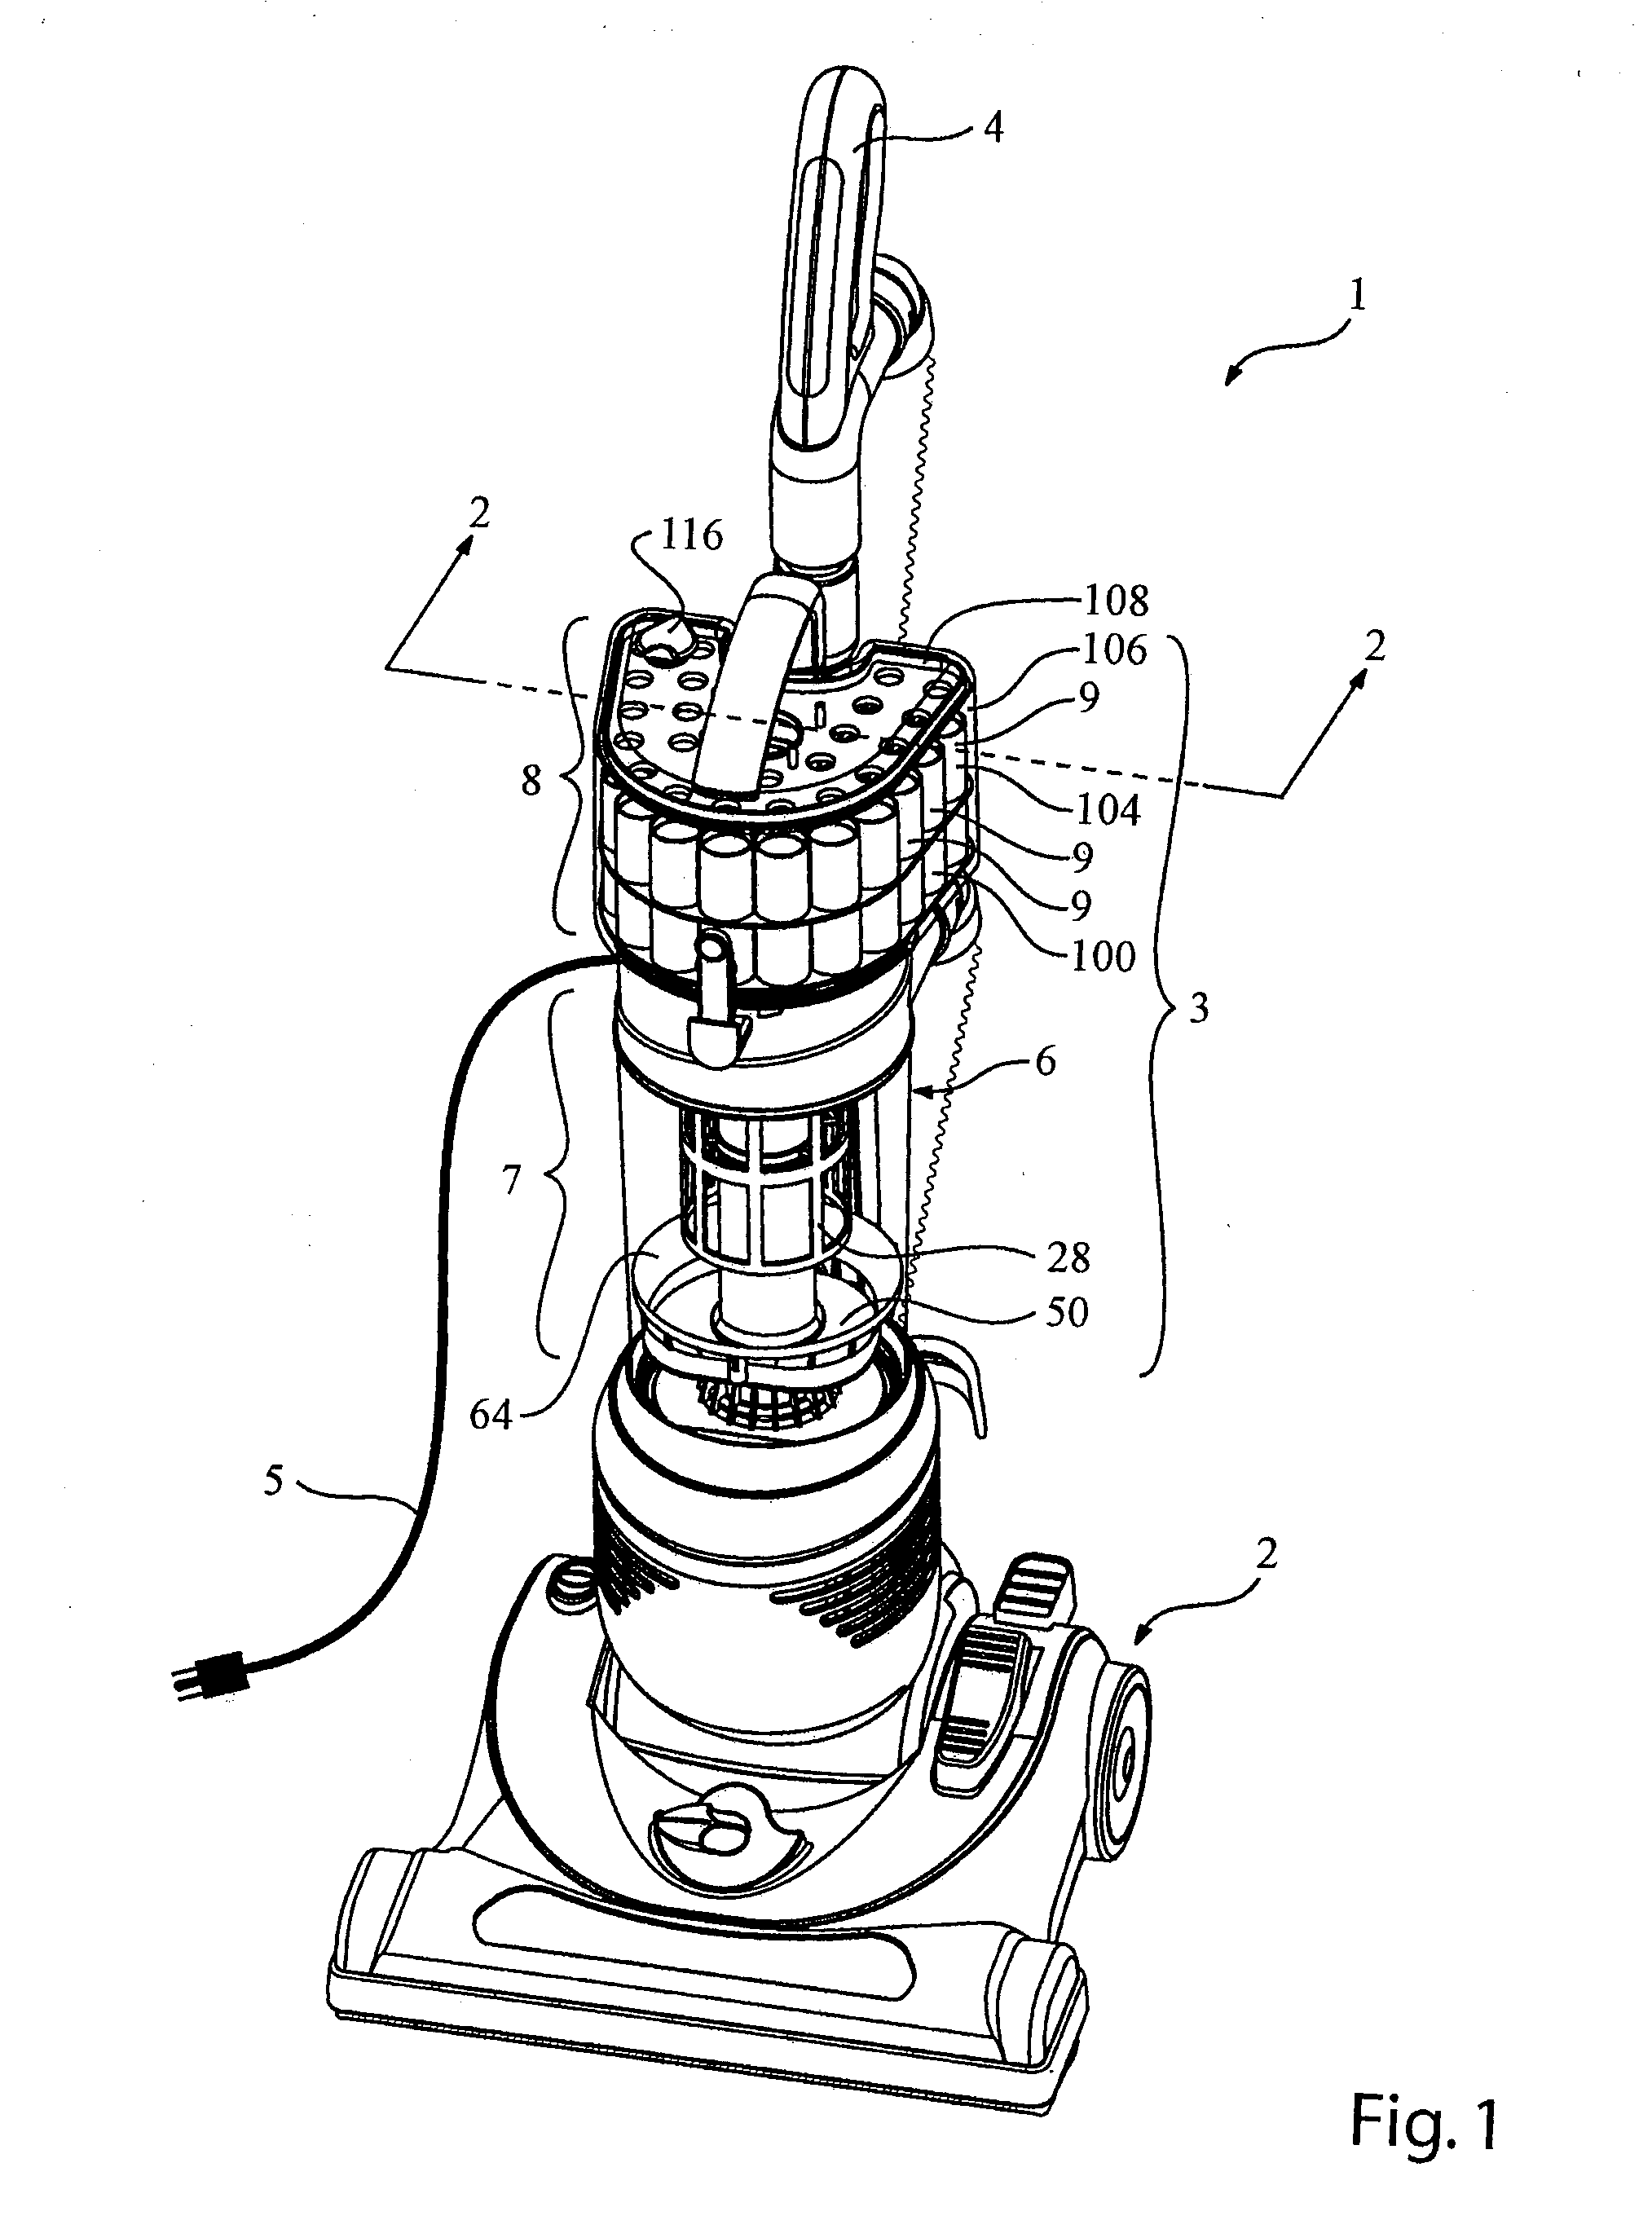 Vacuum cleaner with a moveable divider plate